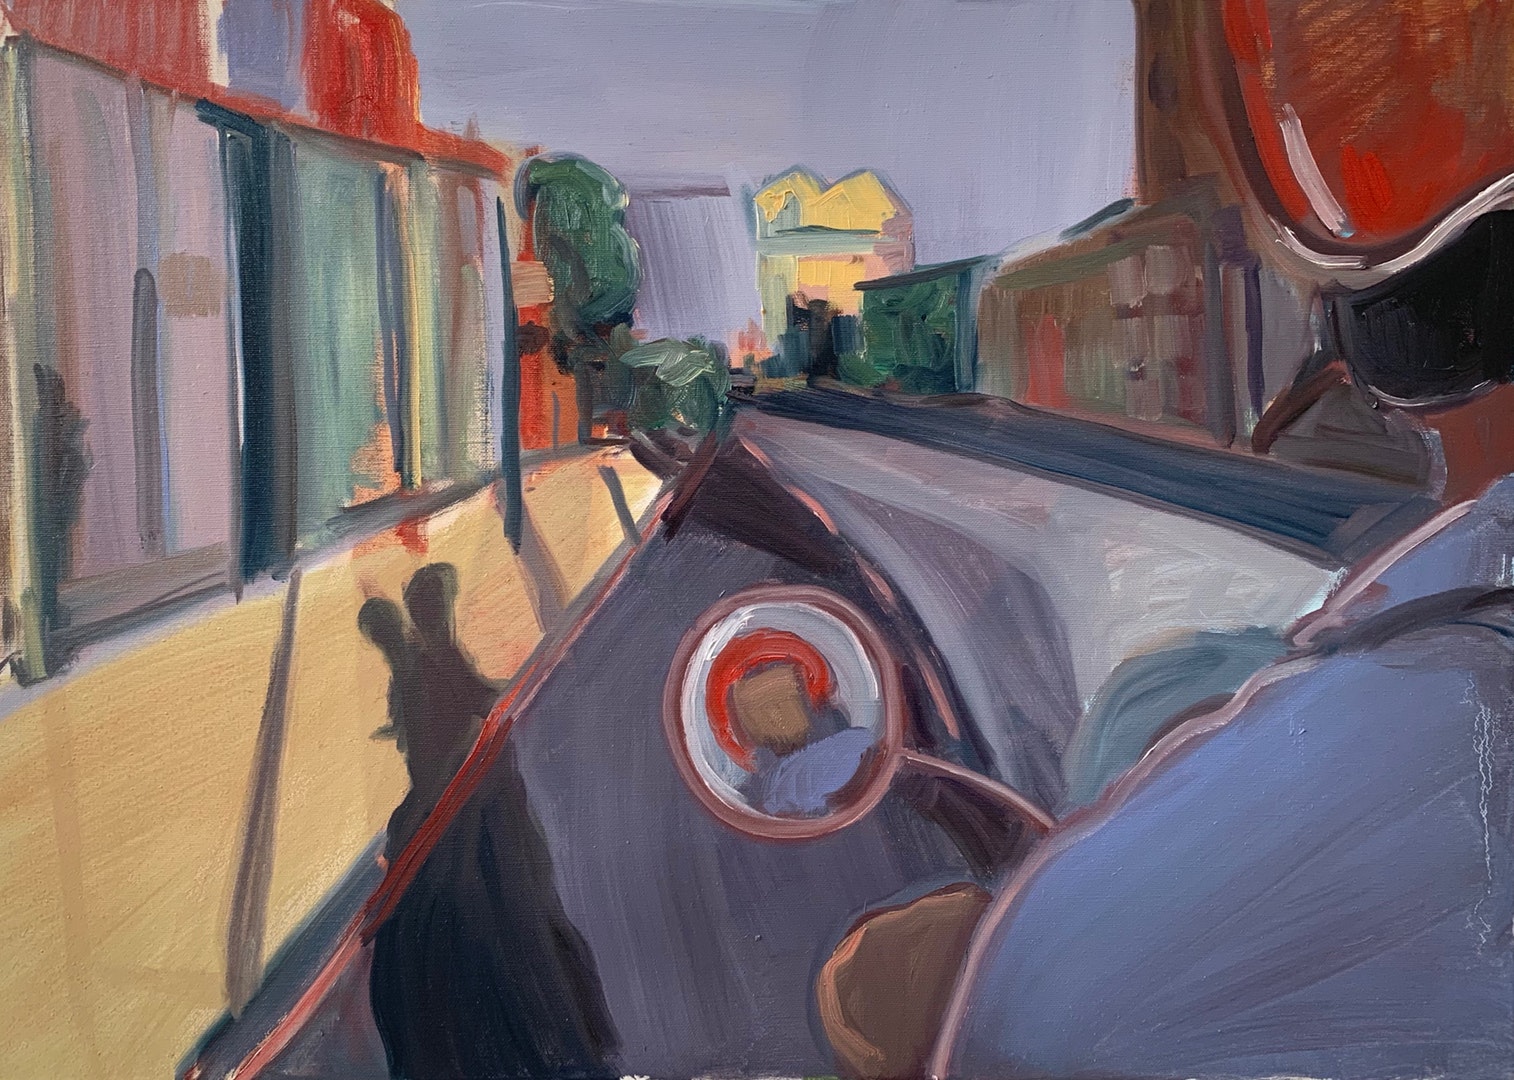 'Holloway Road, Day', Nicole Price, Oil on canvas, 50 x 70 cm